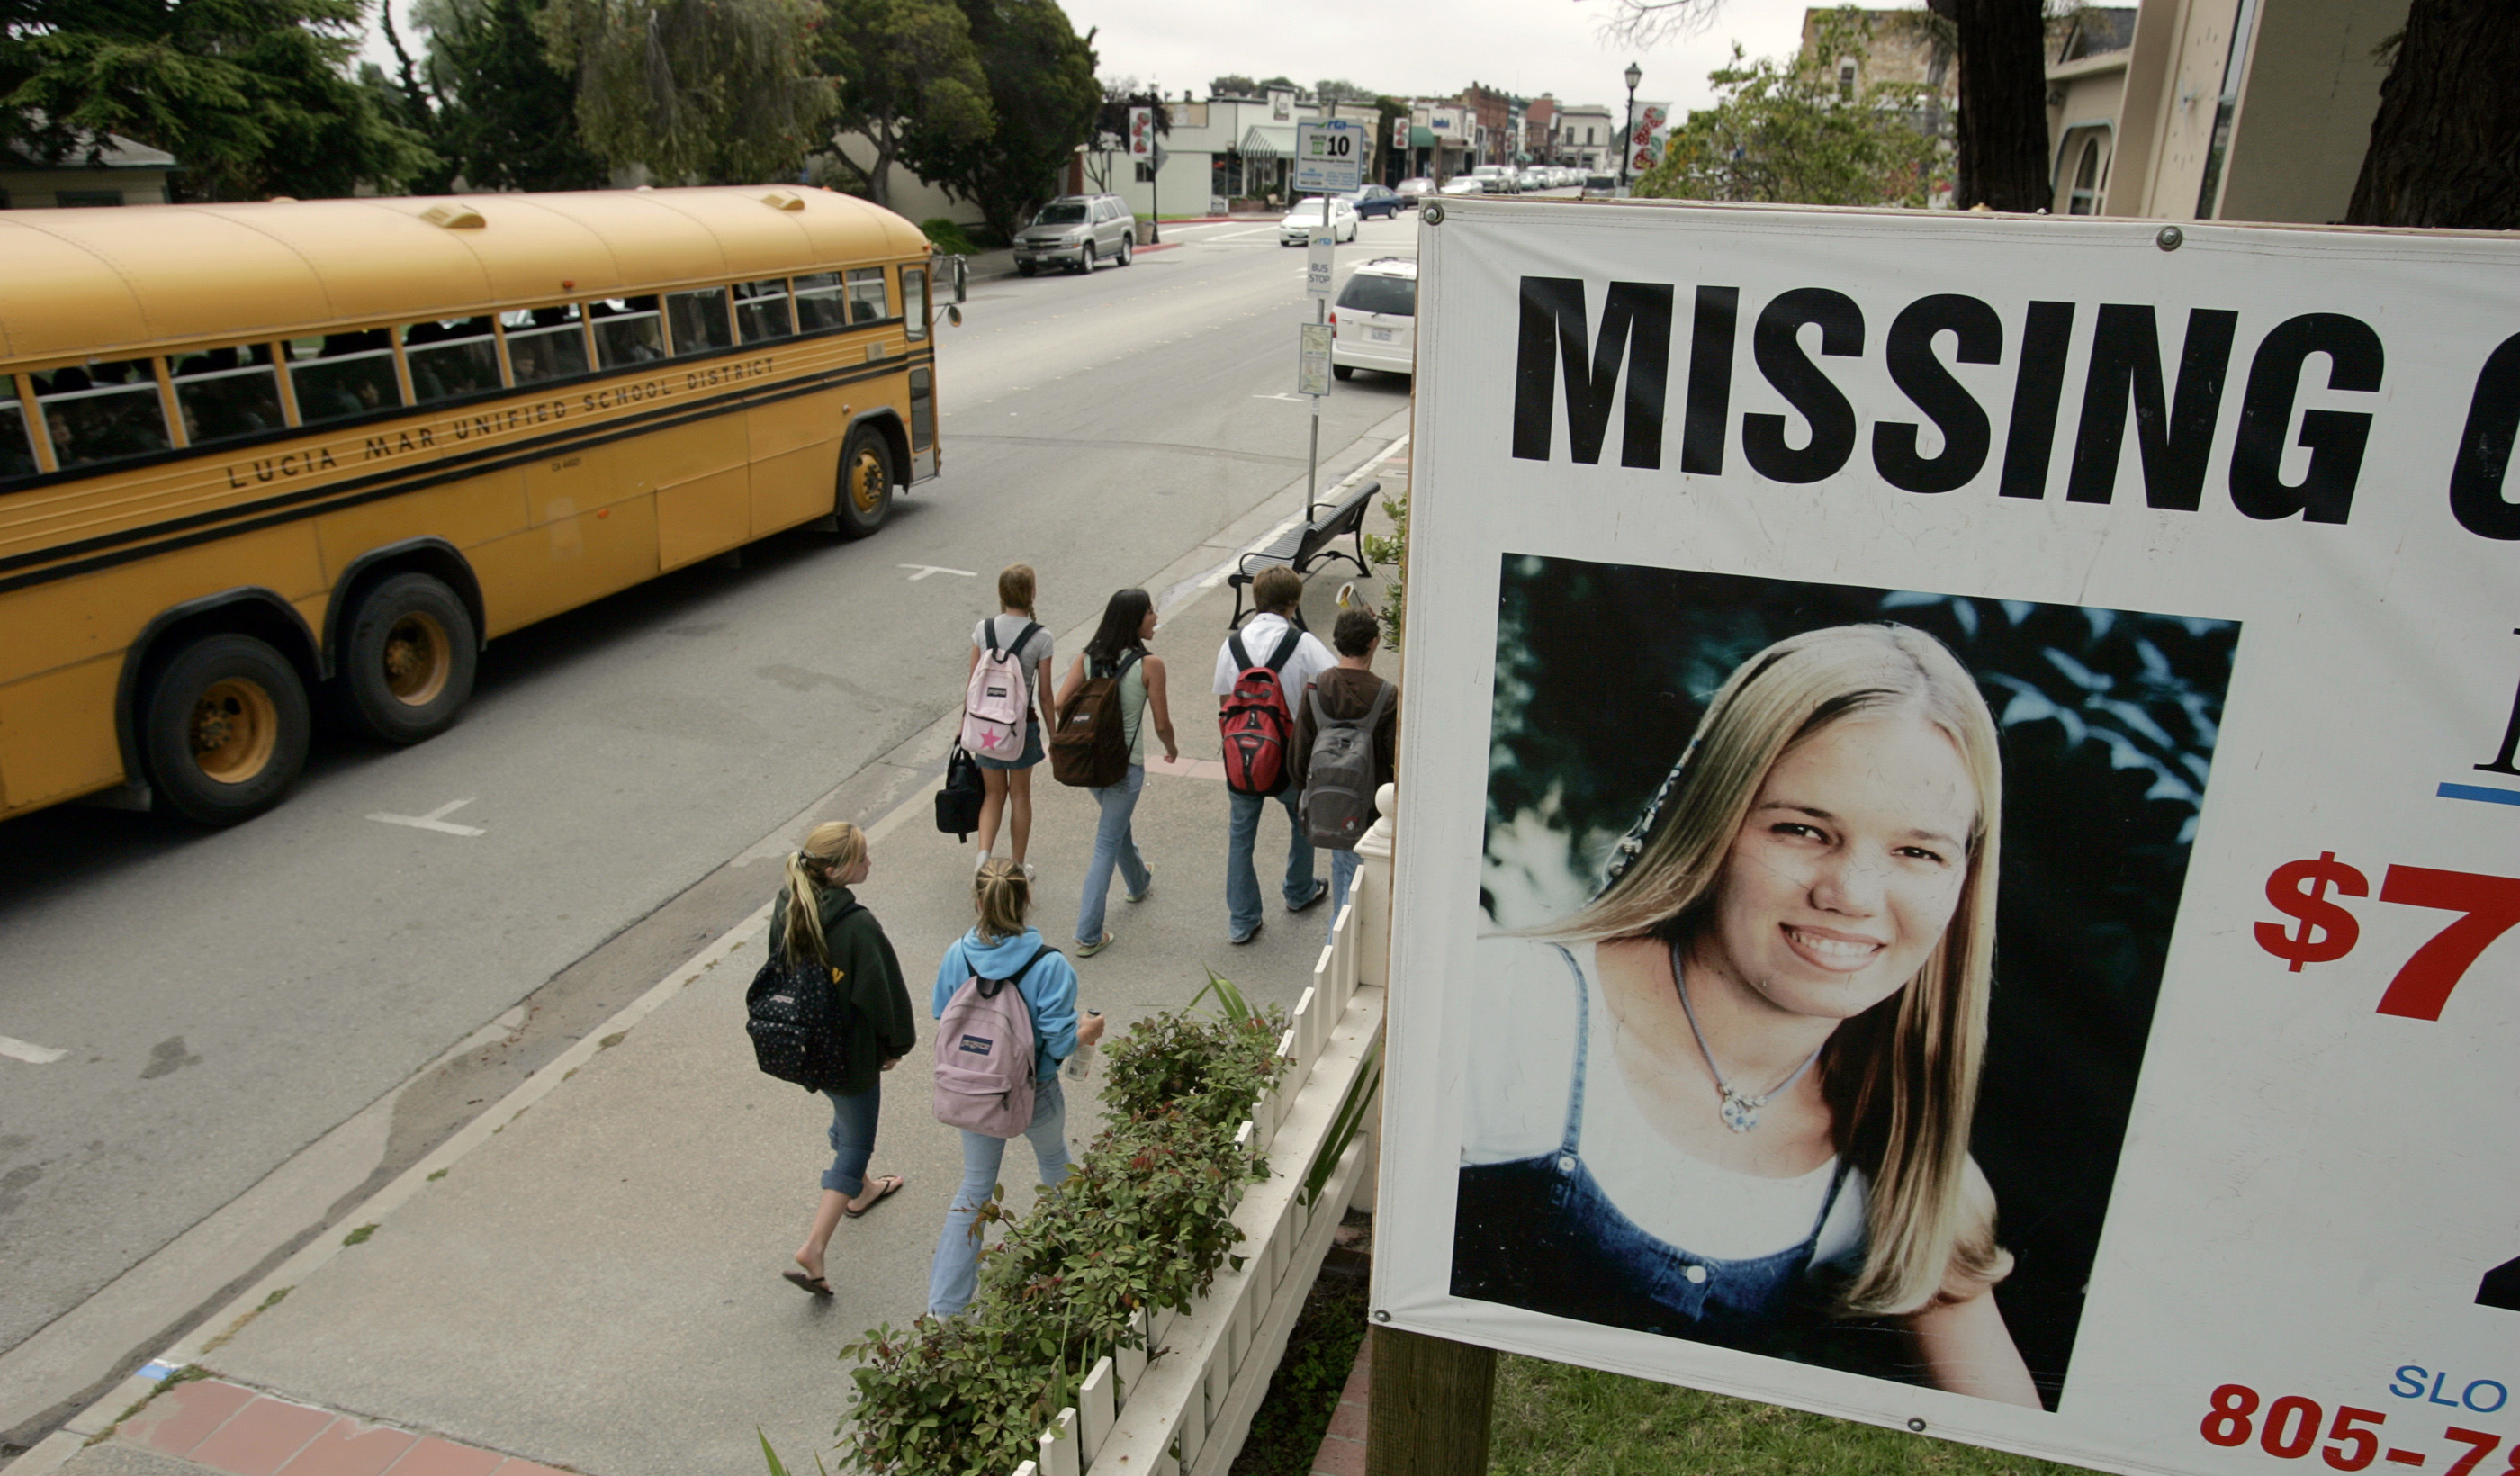 A &quot;Missing&quot; billboard above a sidewalk as young people and a school bus go by